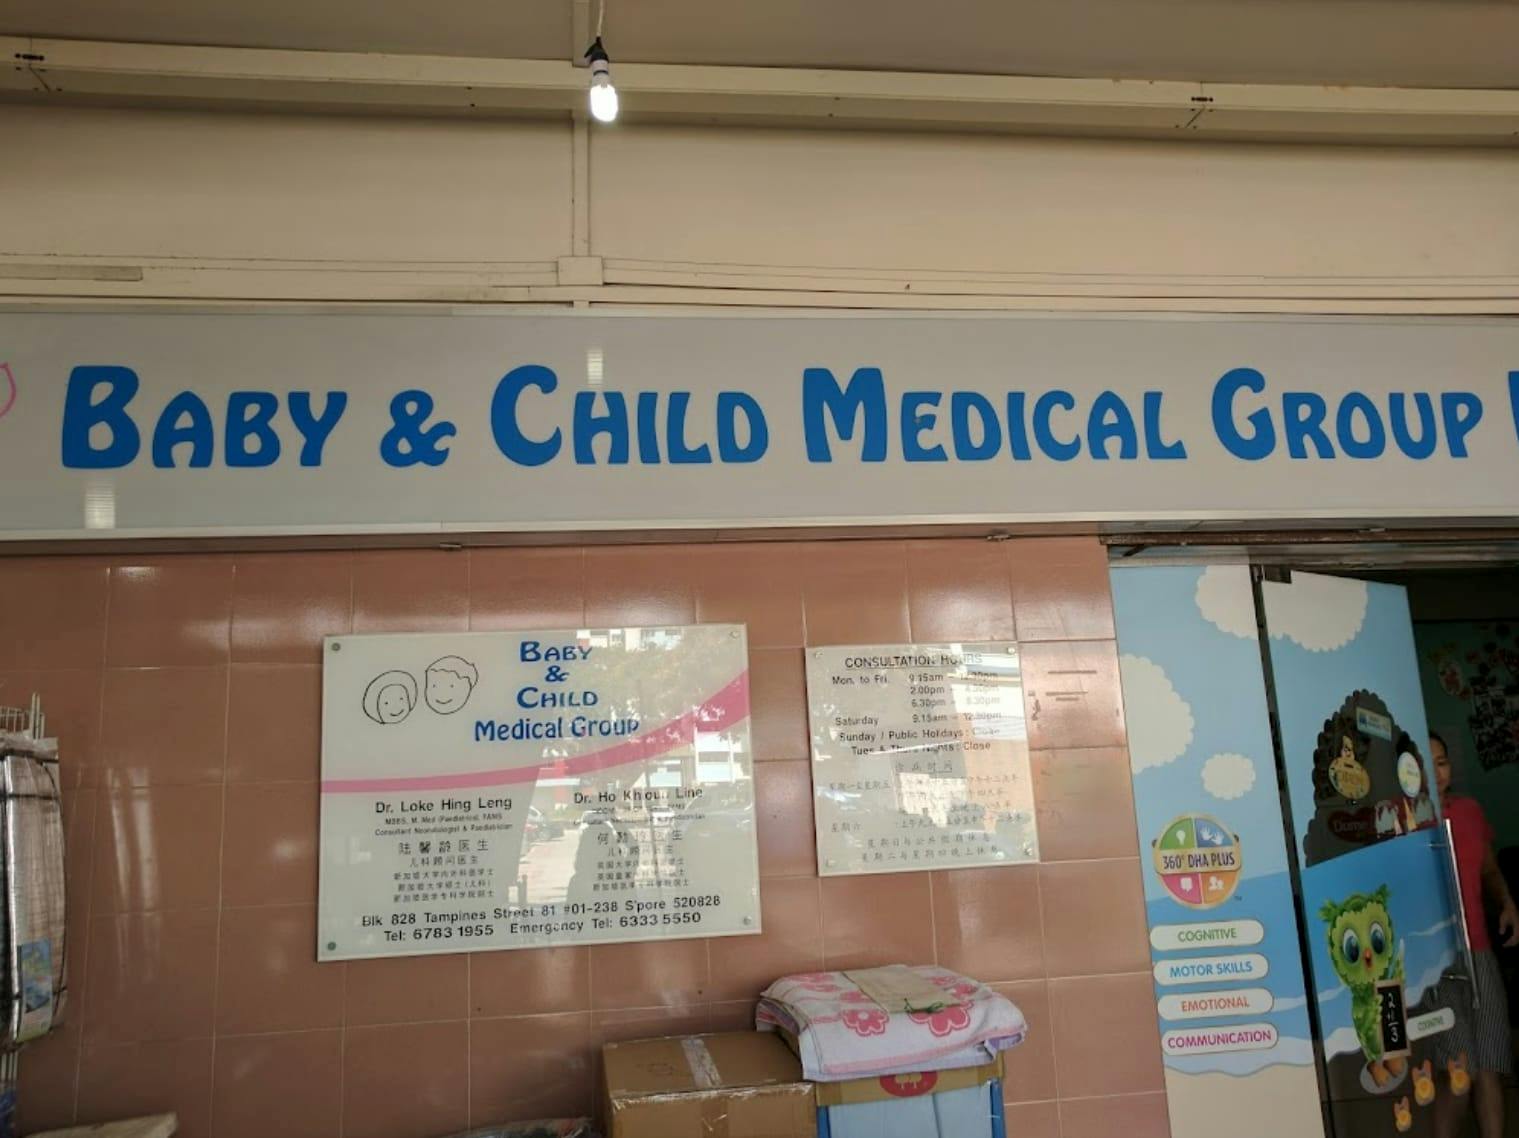 Baby & Child Medical Group